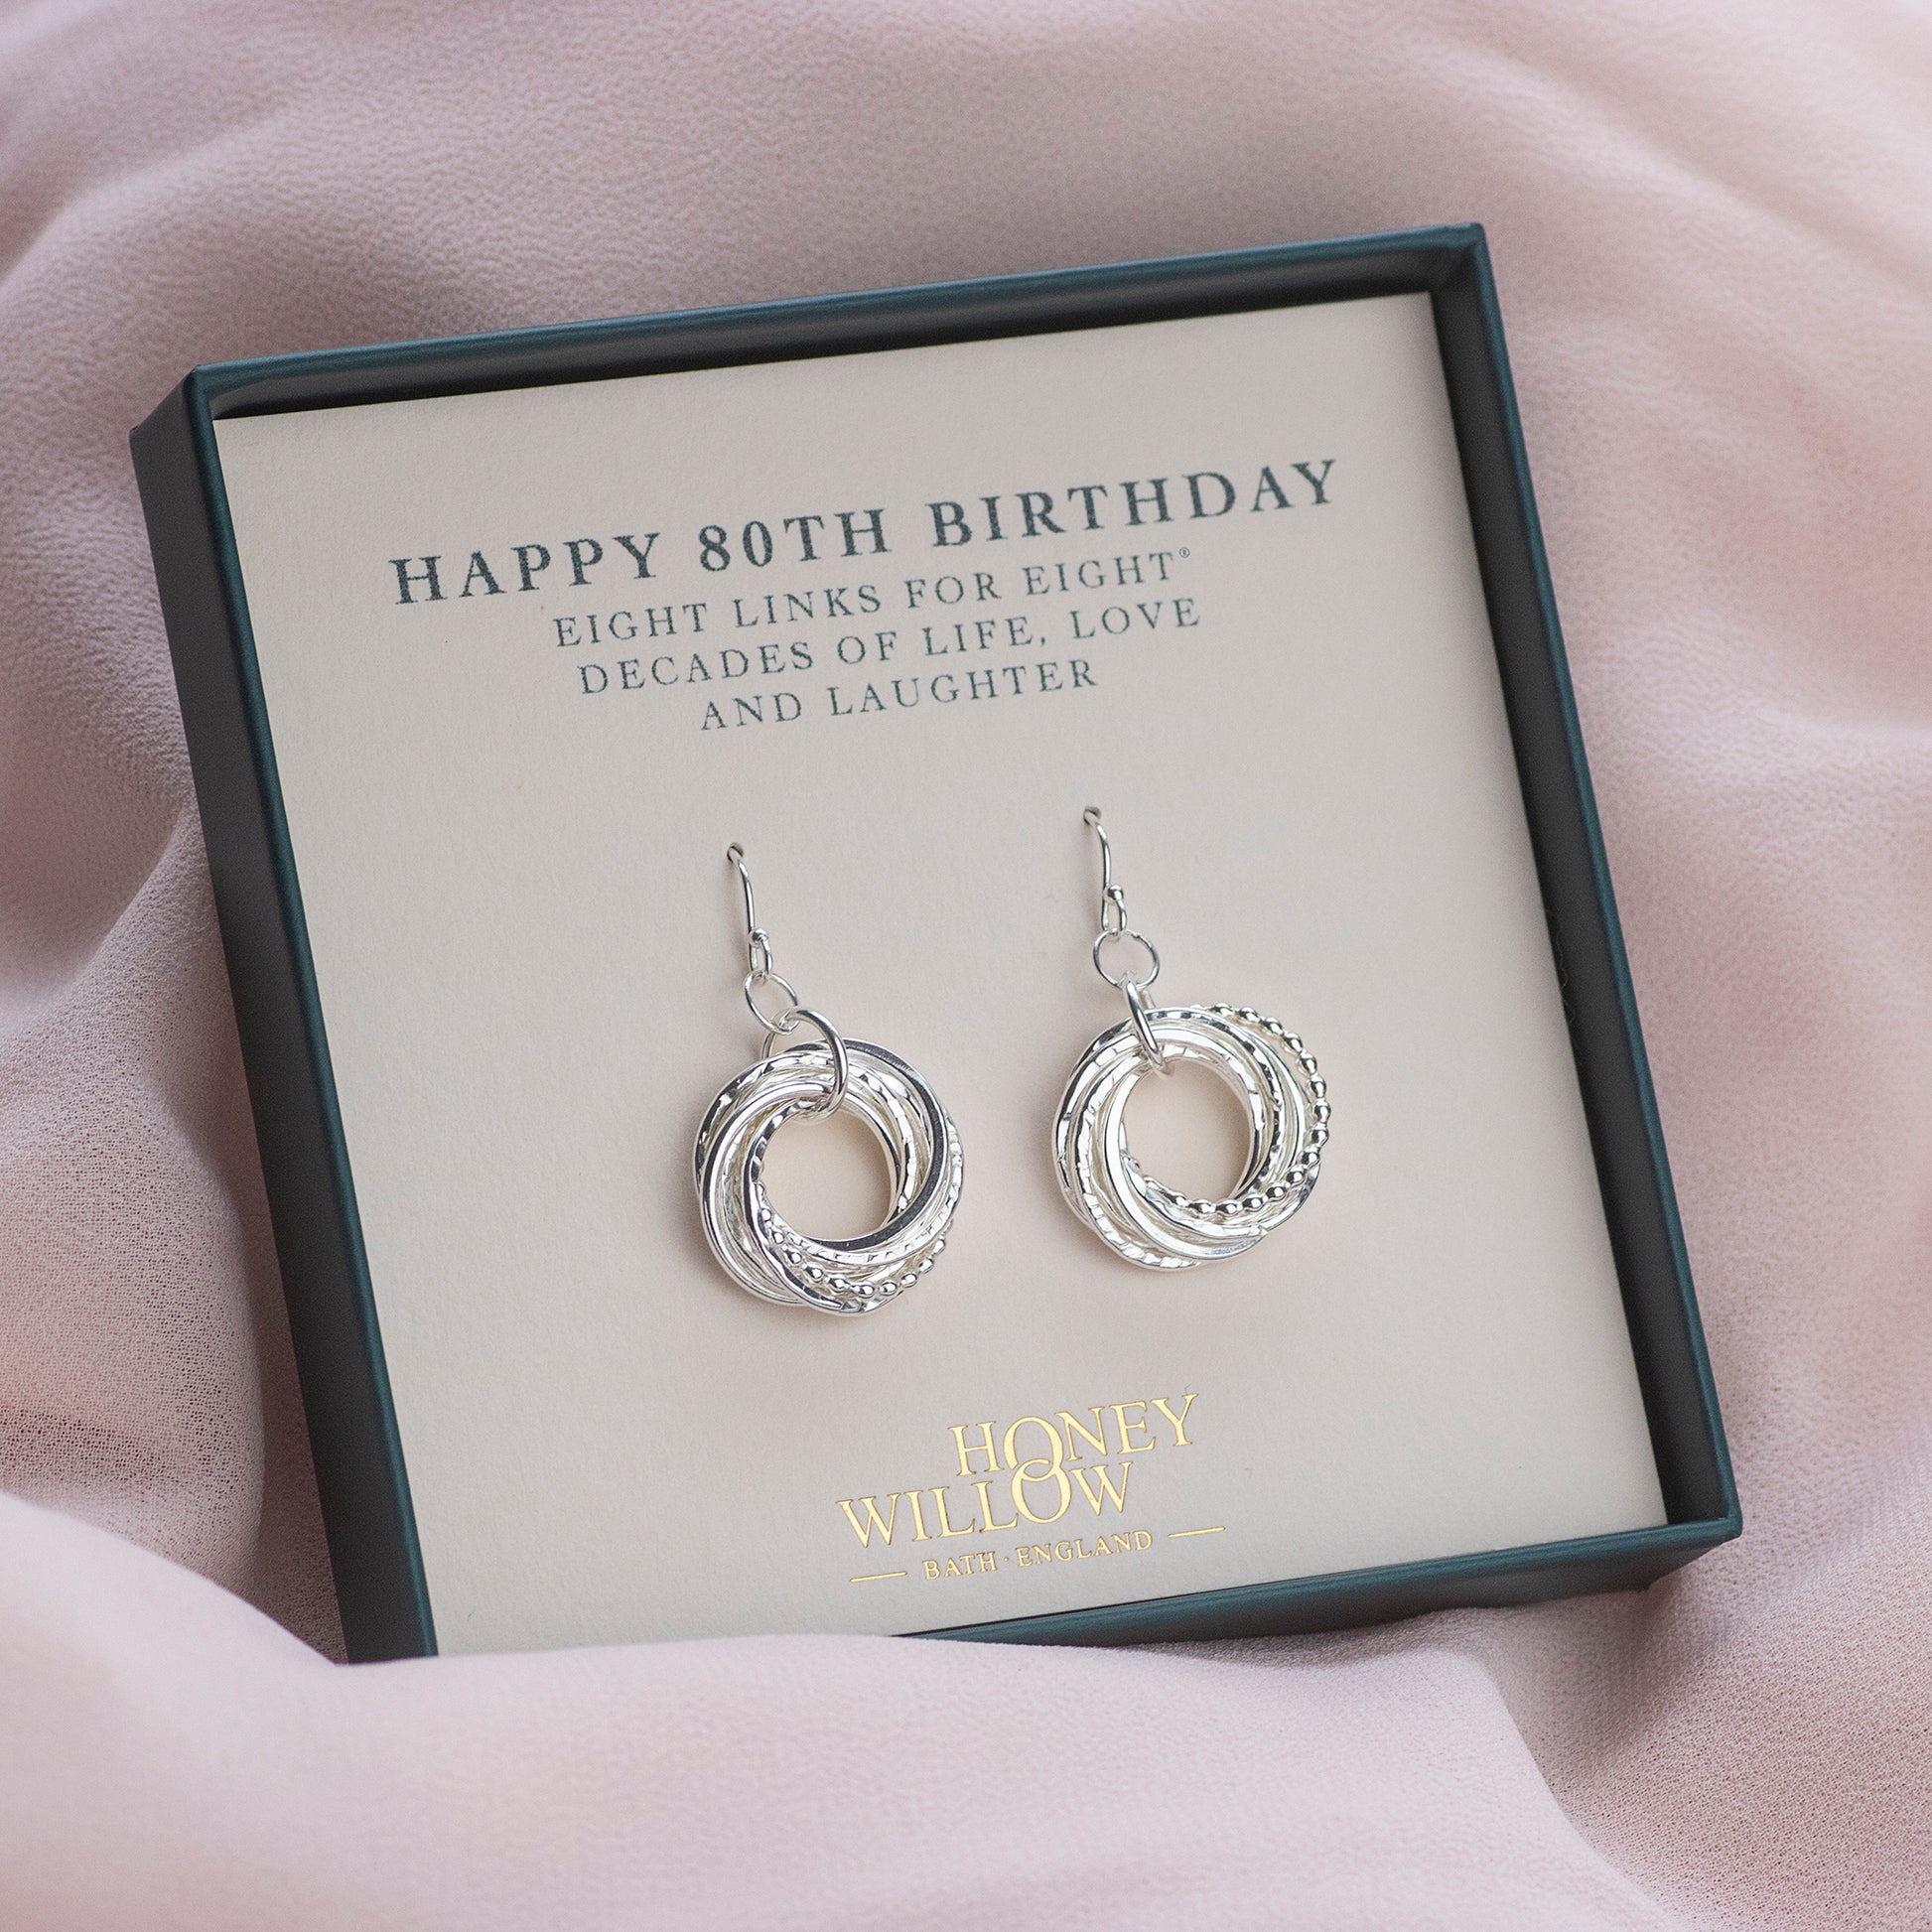 80th Birthday Earrings - Petite Silver - 8 Links for 8 Decades Earrings